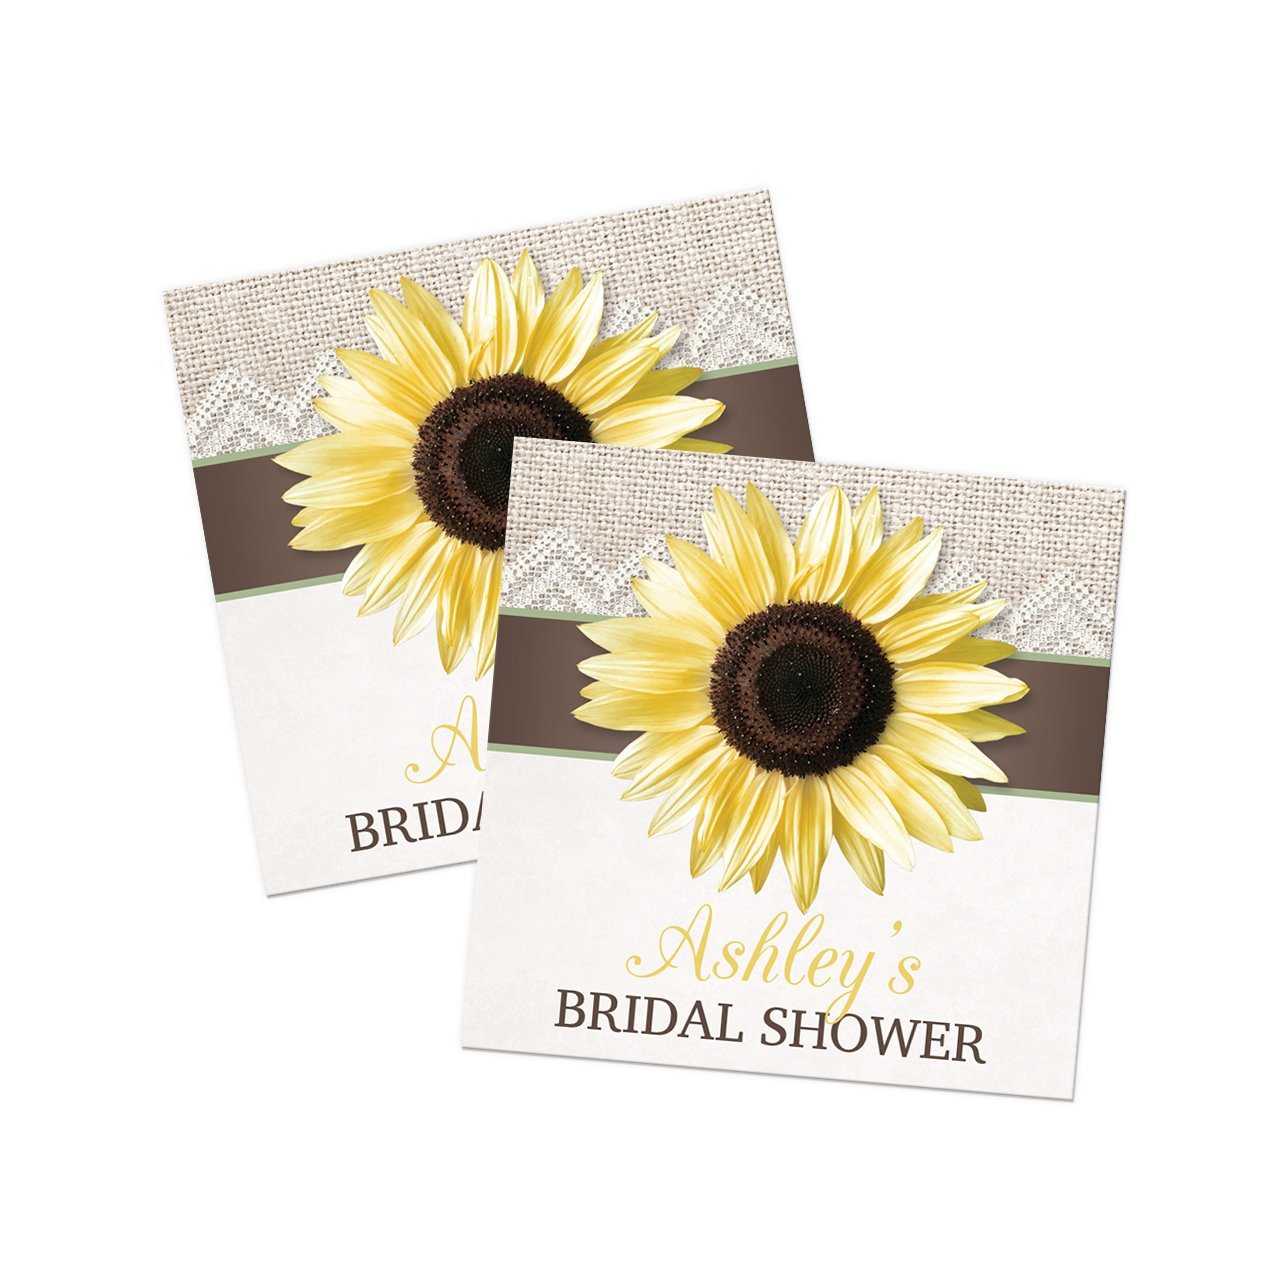 Burlap Lace Brown Sage Sunflower Favor Stickers at Artistically Invited